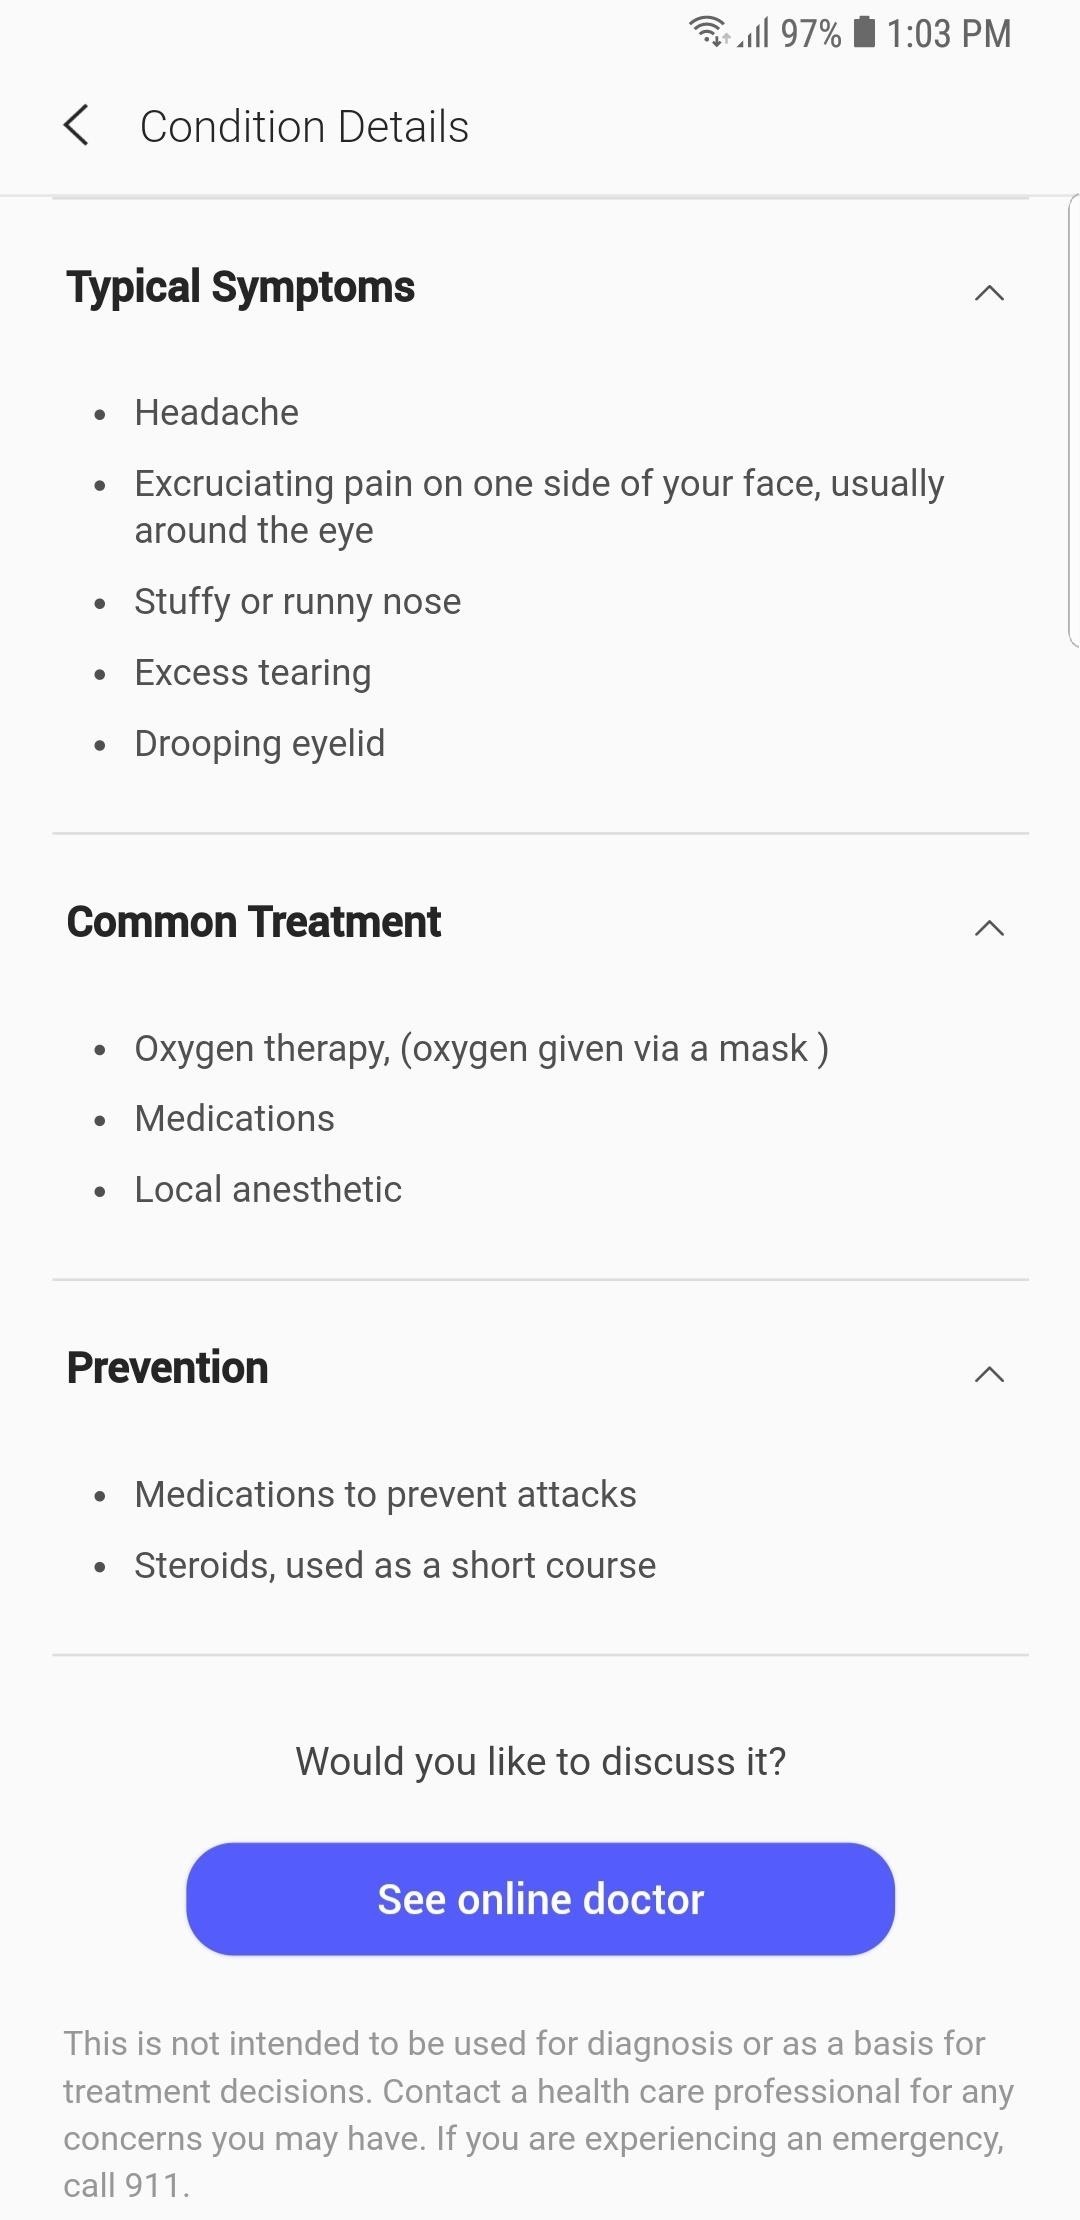 How to Use Samsung Health to Diagnose Symptoms from the Privacy of Your Phone